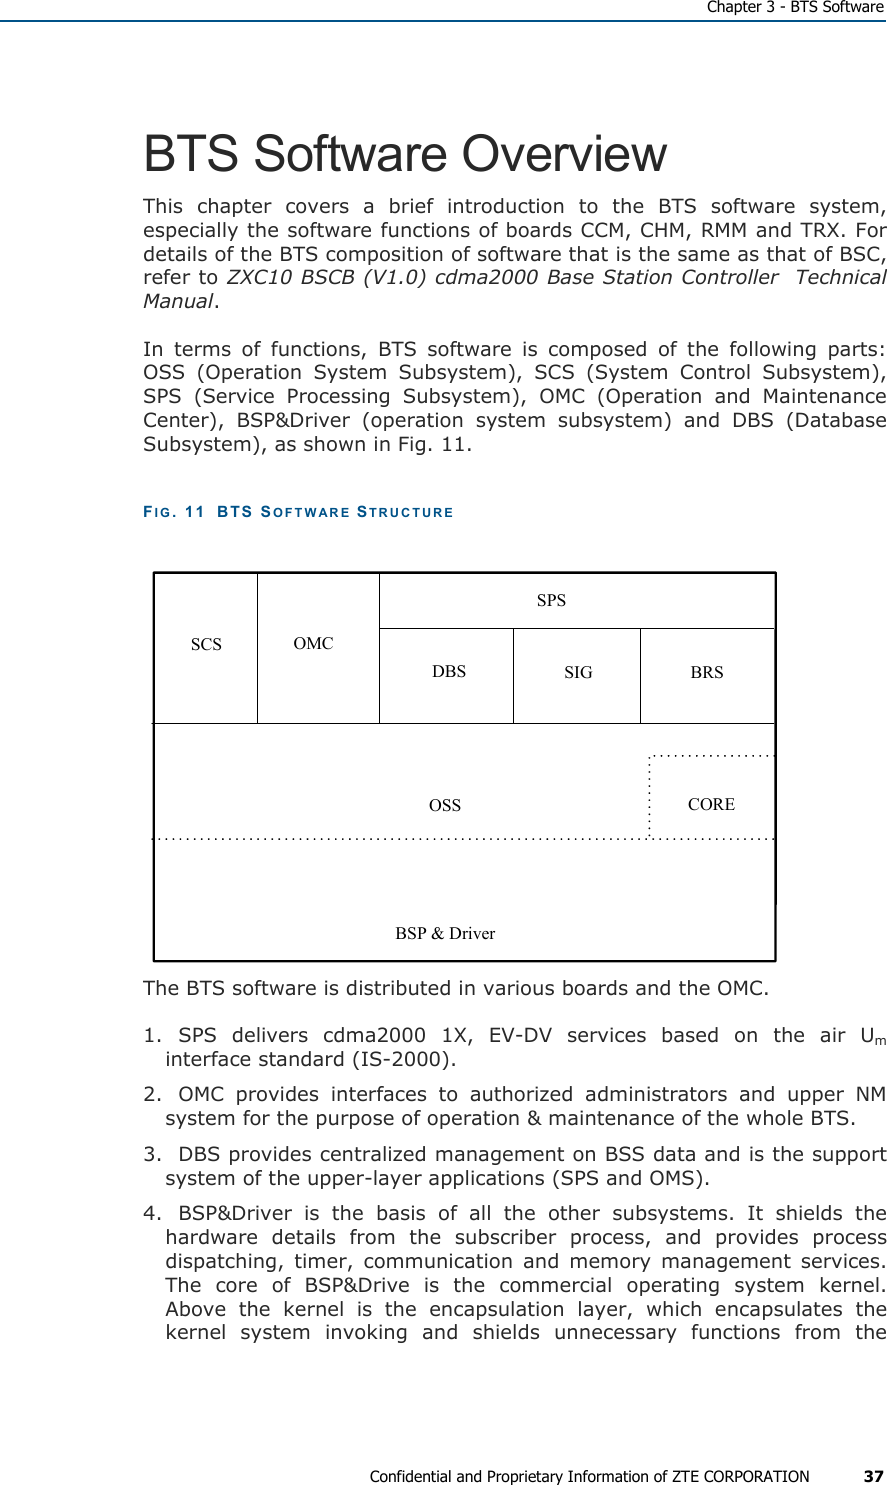   Chapter 3 - BTS Software Confidential and Proprietary Information of ZTE CORPORATION 37 BTS Software Overview This chapter covers a brief introduction to the BTS software system, especially the software functions of boards CCM, CHM, RMM and TRX. For details of the BTS composition of software that is the same as that of BSC, refer to ZXC10 BSCB (V1.0) cdma2000 Base Station Controller  Technical Manual. In terms of functions, BTS software is composed of the following parts: OSS (Operation System Subsystem), SCS (System Control Subsystem), SPS (Service Processing Subsystem), OMC (Operation and Maintenance Center), BSP&amp;Driver (operation system subsystem) and DBS (Database Subsystem), as shown in Fig. 11. FIG. 11  BTS SOFTWARE STRUCTURE  SCS OMCDBS SIG BRSSPSOSS COREBSP &amp; Driver The BTS software is distributed in various boards and the OMC.  1. SPS delivers cdma2000 1X, EV-DV services based on the air Um interface standard (IS-2000). 2.  OMC provides interfaces to authorized administrators and upper NM system for the purpose of operation &amp; maintenance of the whole BTS. 3.  DBS provides centralized management on BSS data and is the support system of the upper-layer applications (SPS and OMS). 4.  BSP&amp;Driver is the basis of all the other subsystems. It shields the hardware details from the subscriber process, and provides process dispatching, timer, communication and memory management services. The core of BSP&amp;Drive is the commercial operating system kernel. Above the kernel is the encapsulation layer, which encapsulates the kernel system invoking and shields unnecessary functions from the 